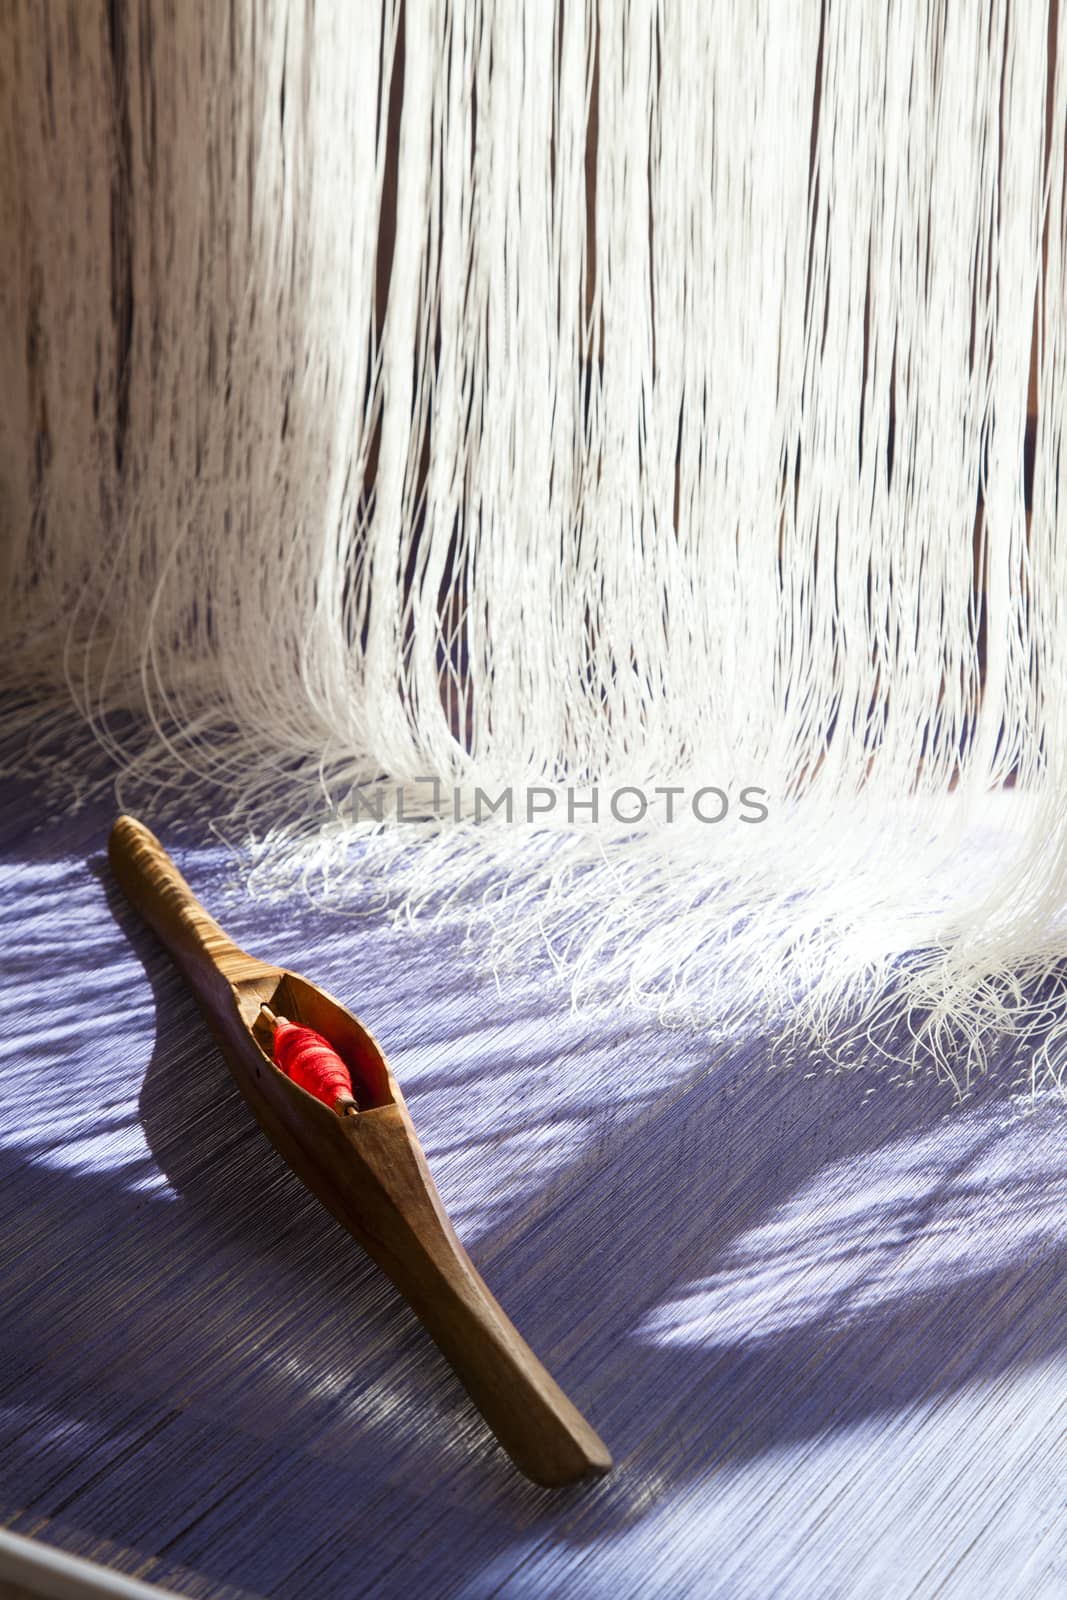 old weaving Loom and thread of yarn. by jee1999